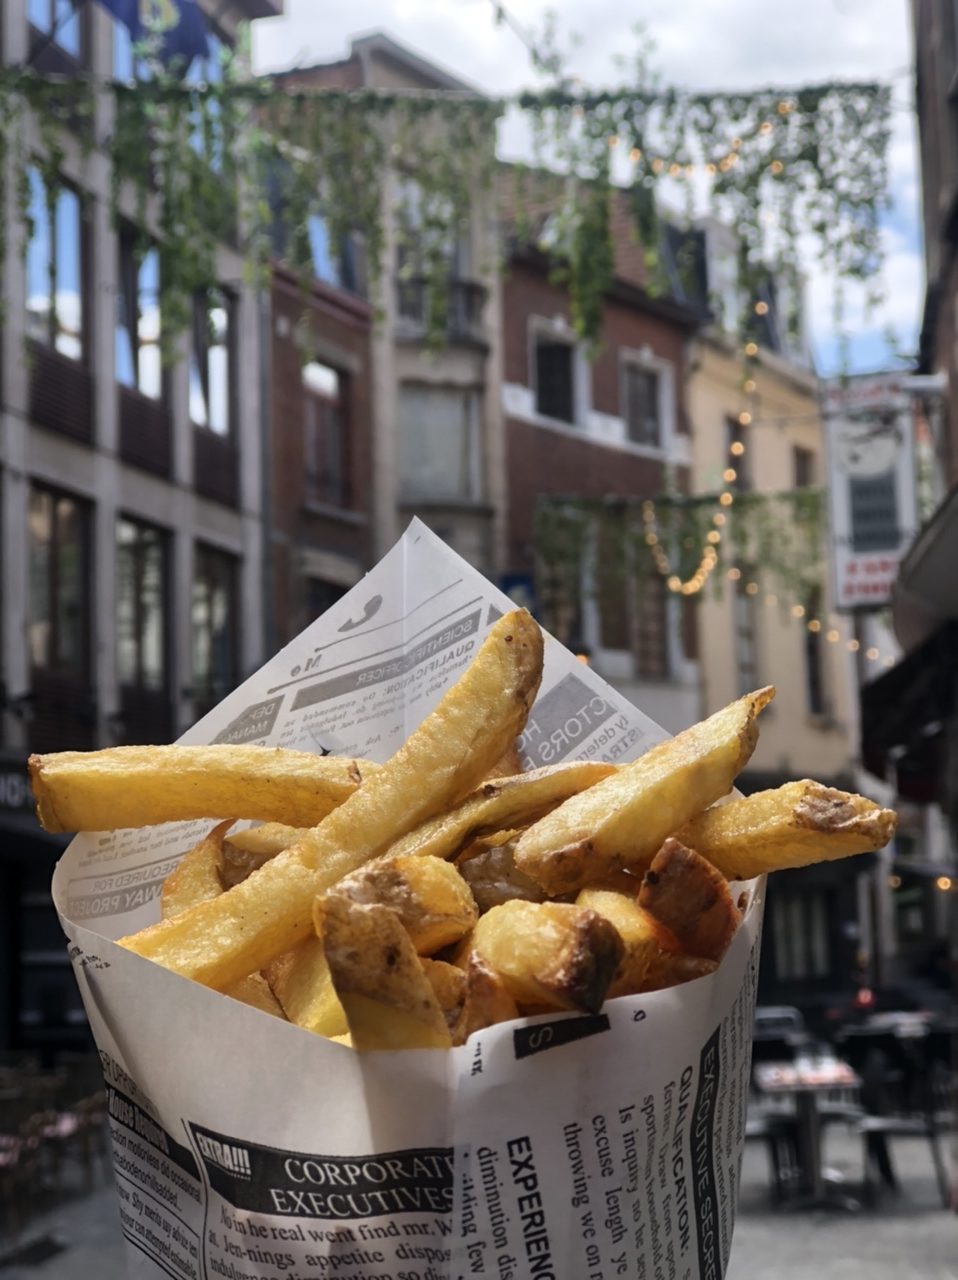 Fries in funnel formed out of printed paper designed to look like newspaper with held up with four tall Brussels buildings in background